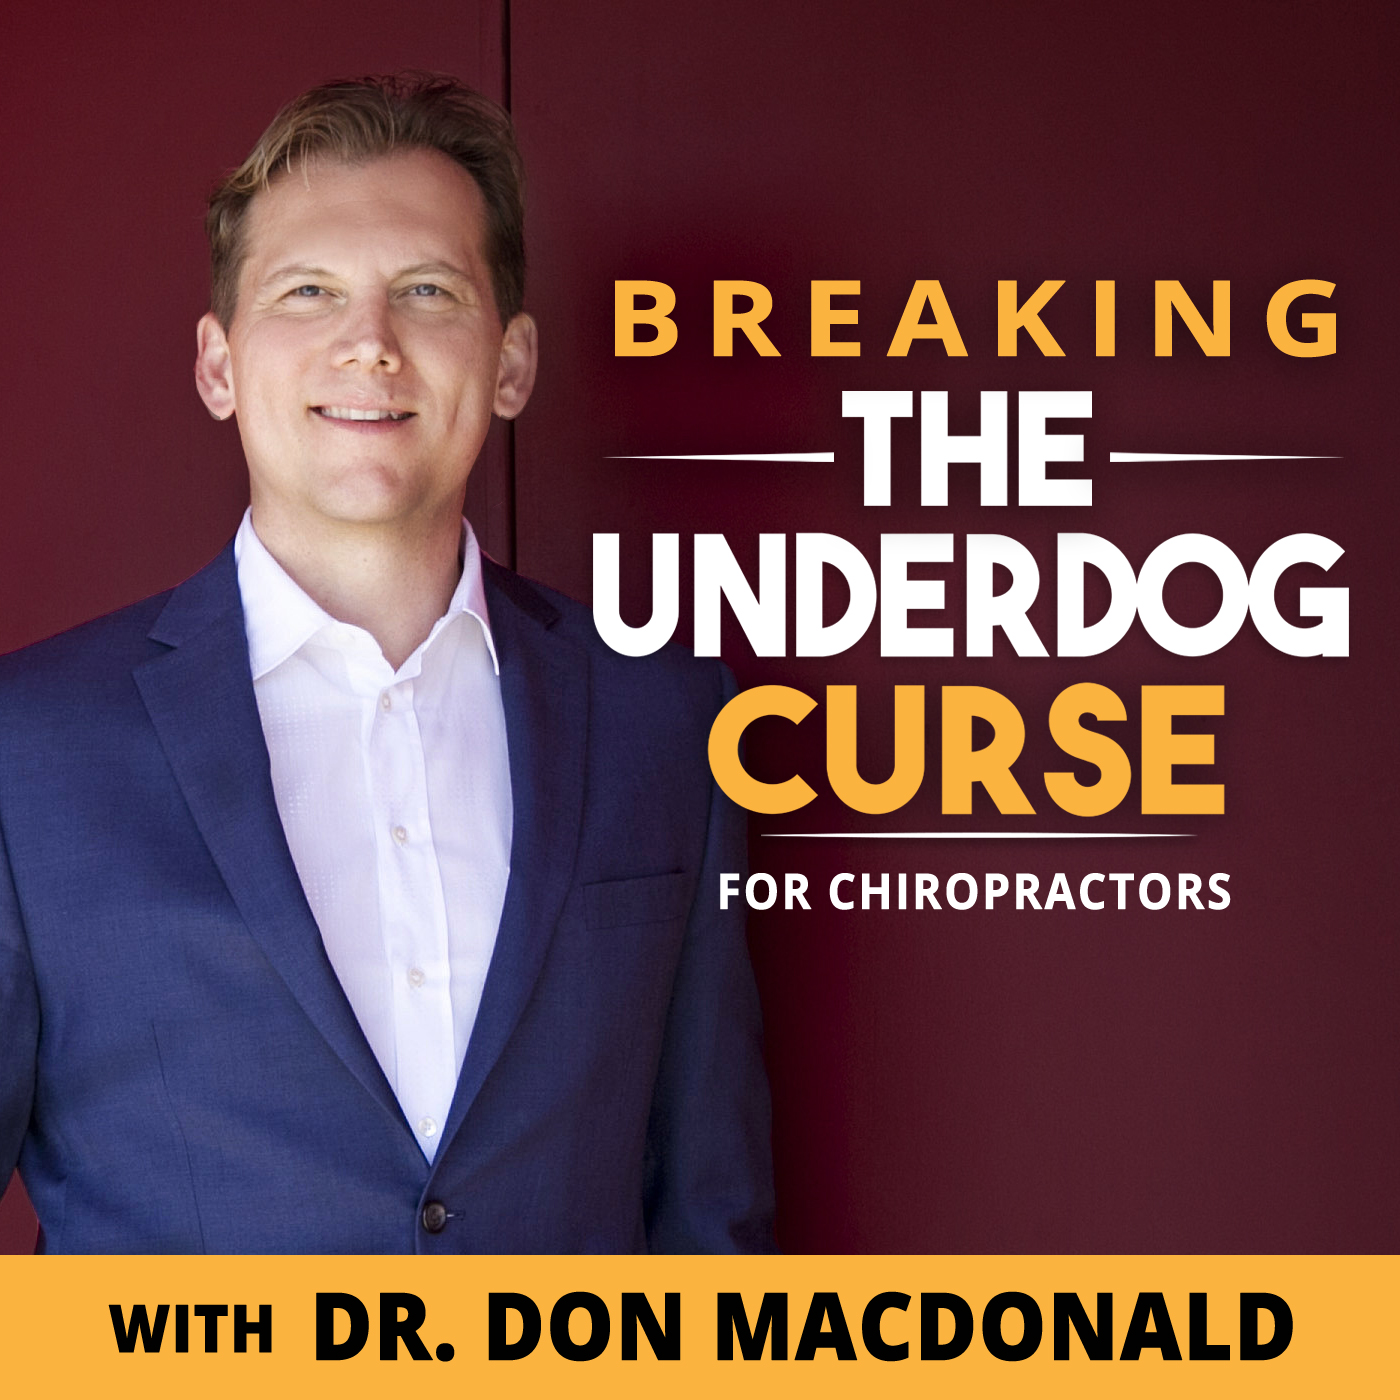 Facebook Marketing for Chiropractors - Dr. Enrico Dolcecore